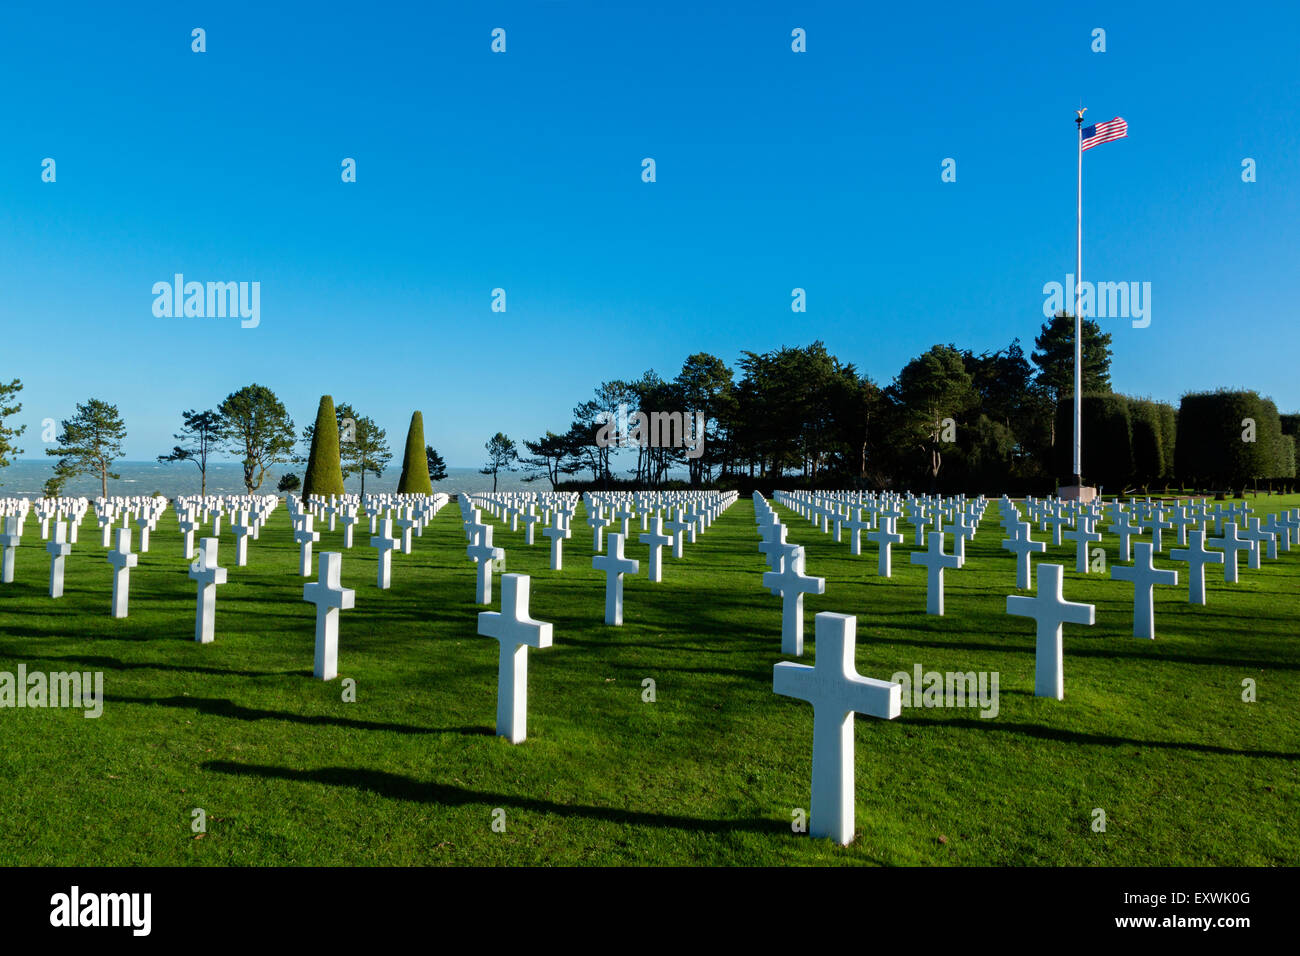 American Cemetery At Colleville Sur Mer, Normandy, France Stock Photo